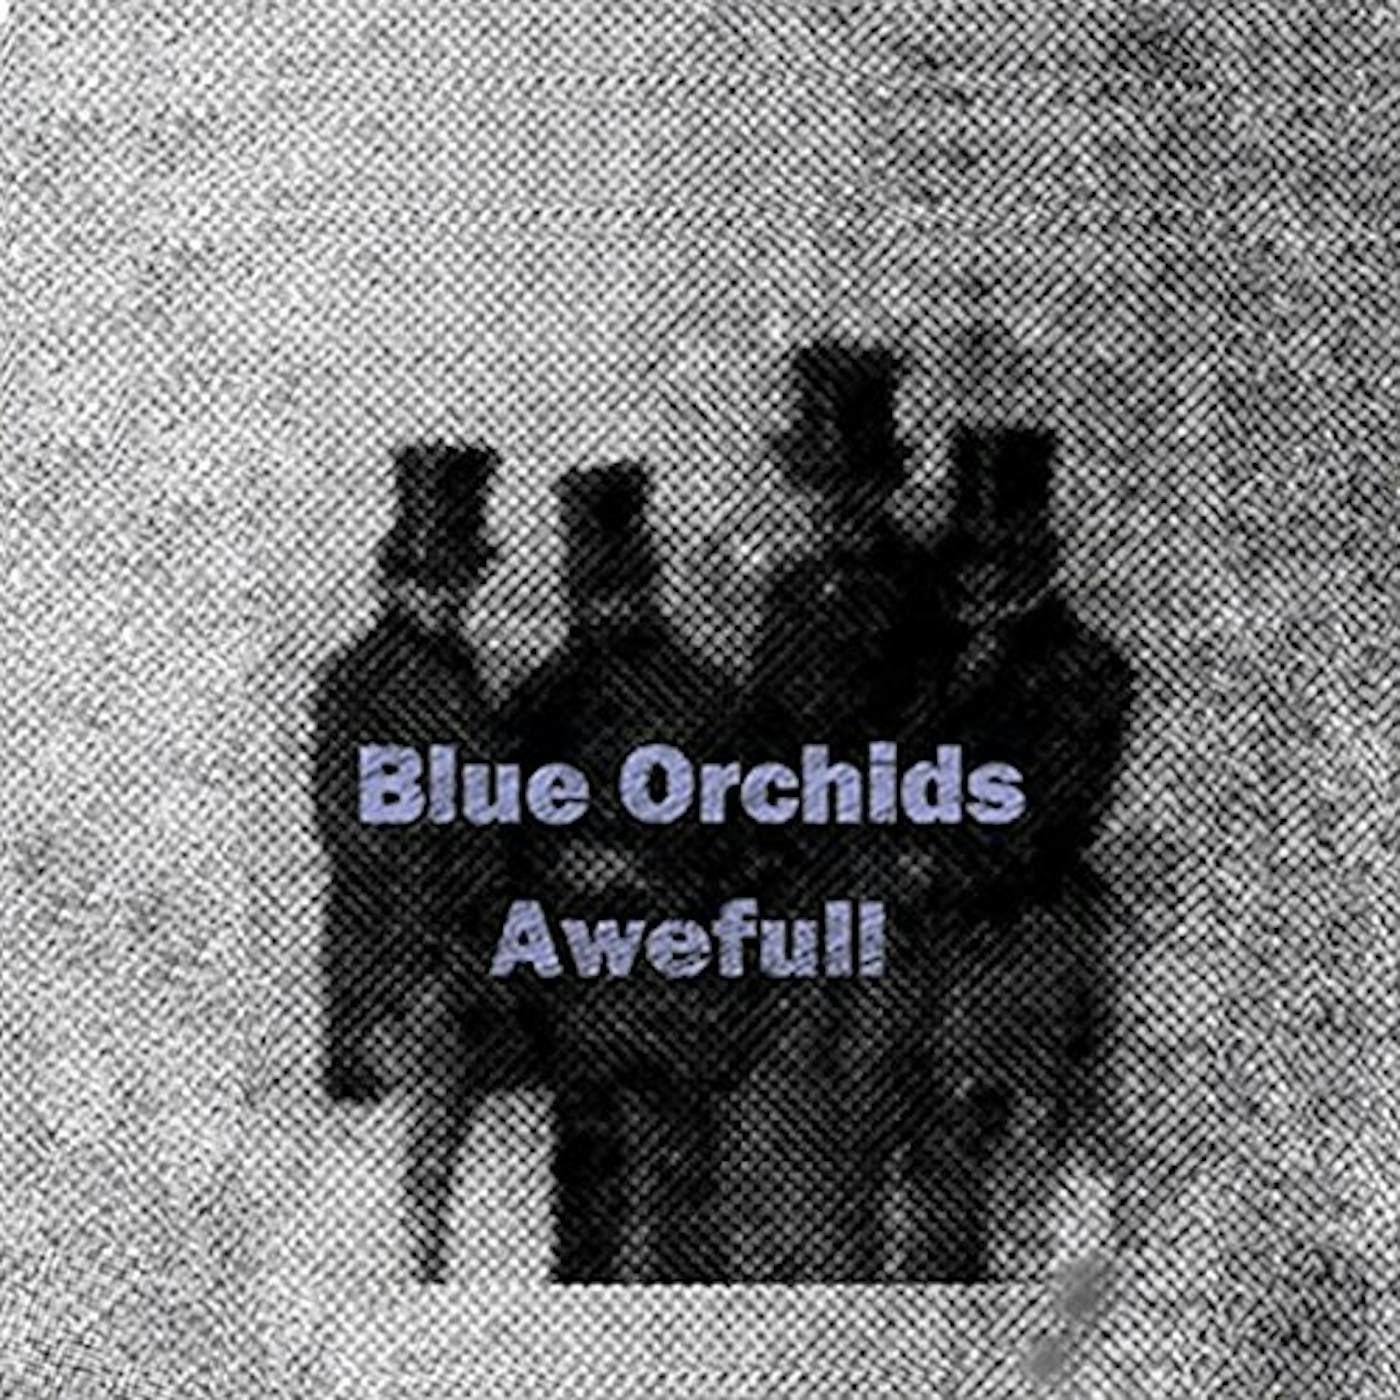 Blue Orchids Awefull Vinyl Record